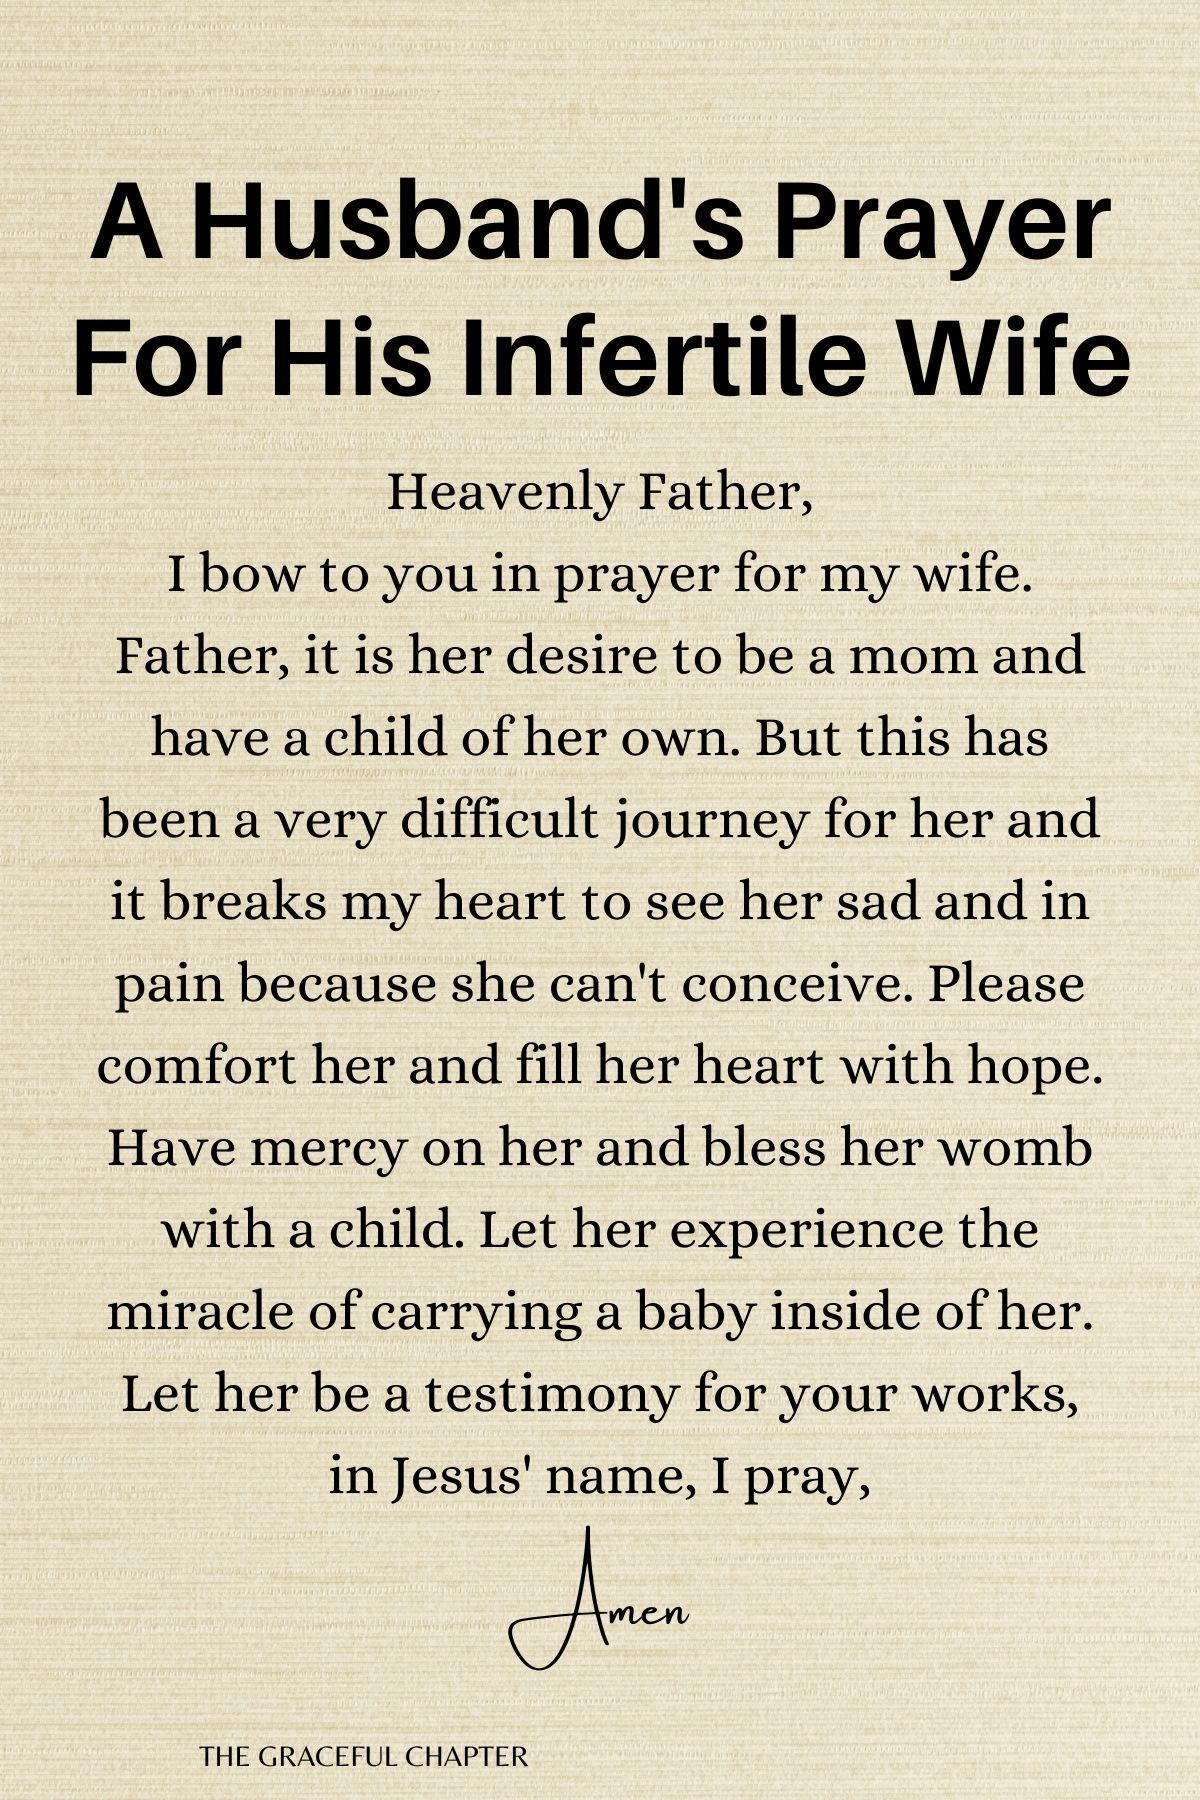 A husband's prayer for his infertile wife